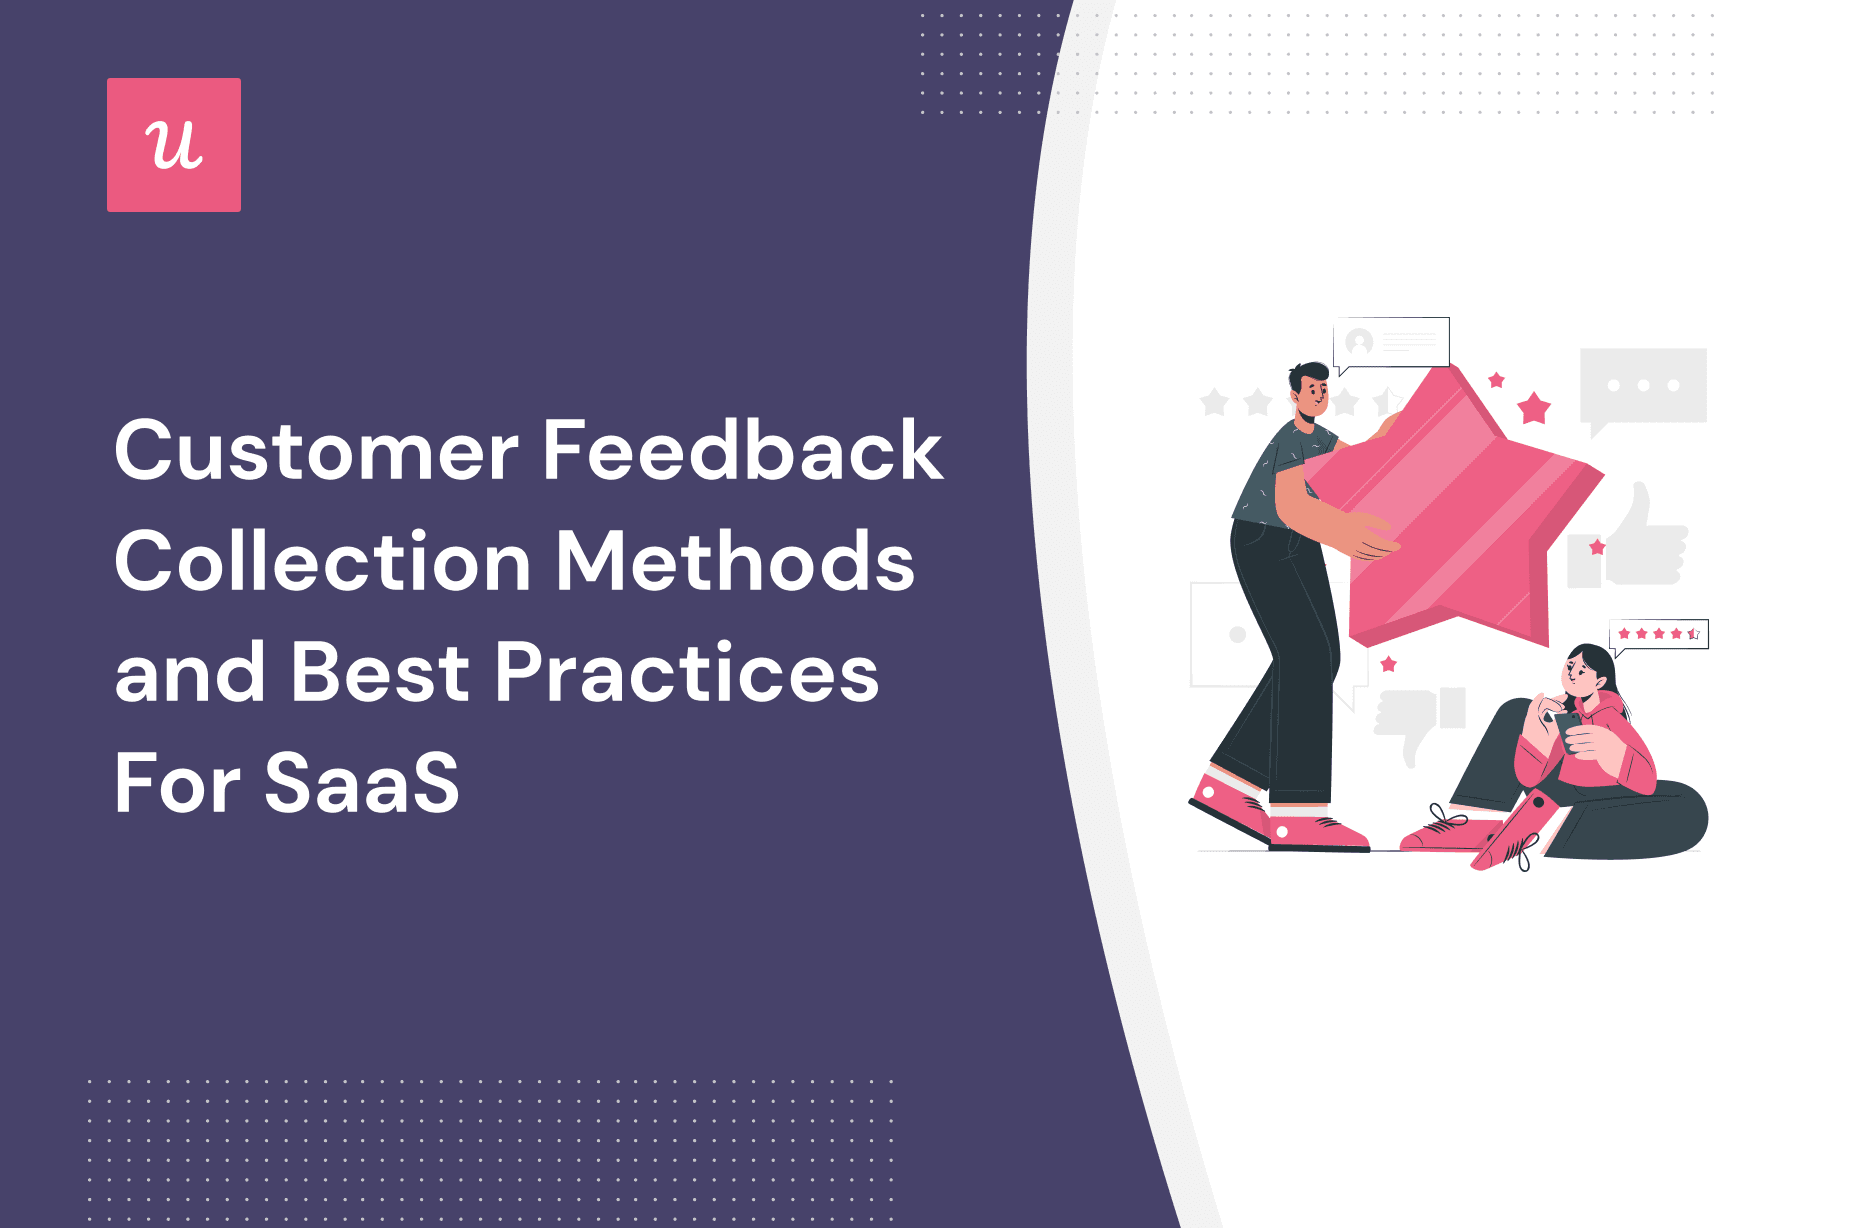 Customer Feedback Collection Methods and Best Practices for SaaS cover